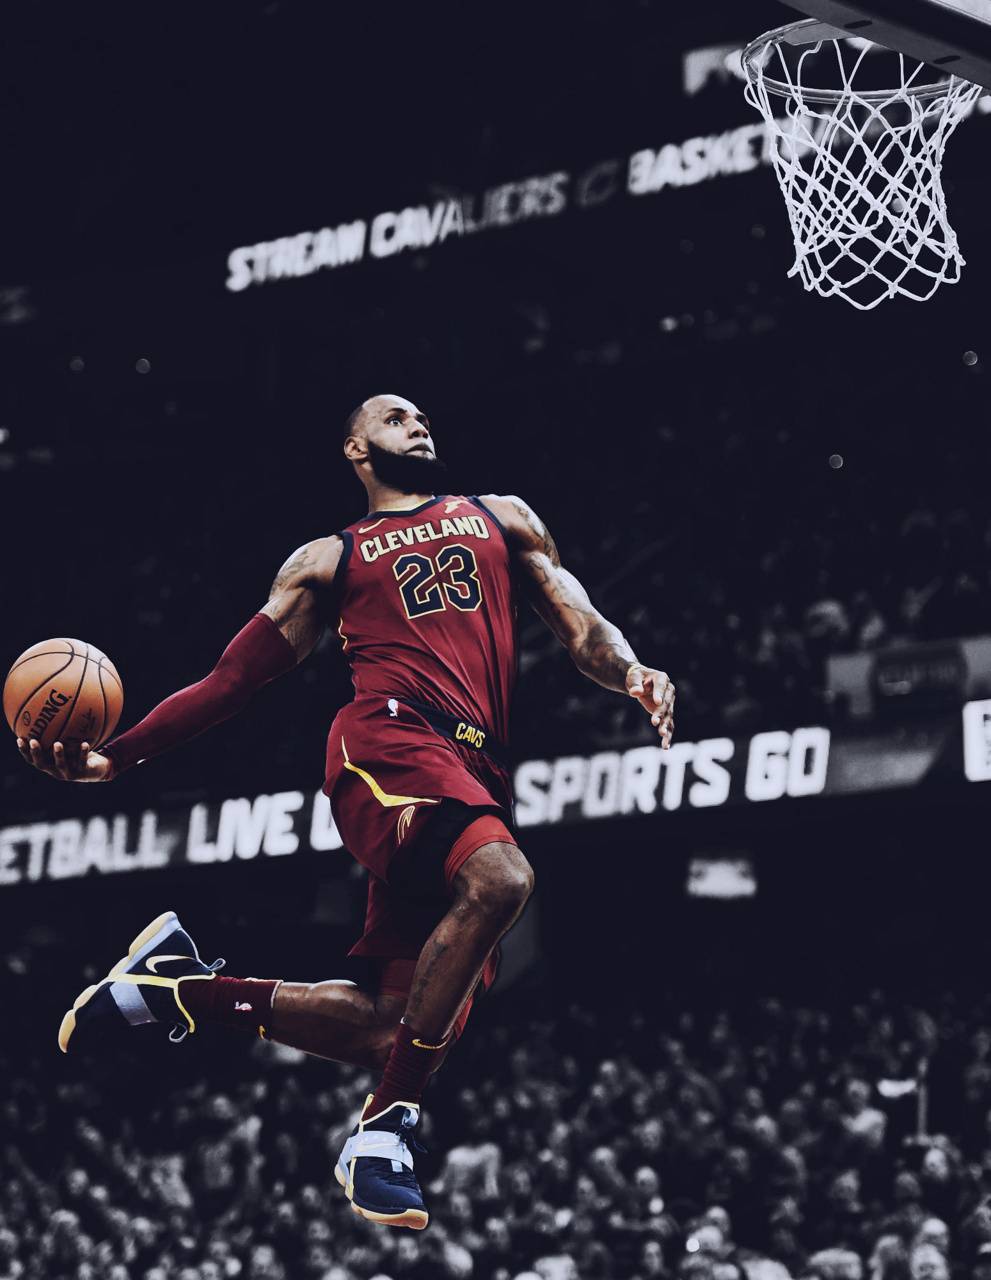 A basketball player jumping in the air with a ball in his hand. - Lebron James